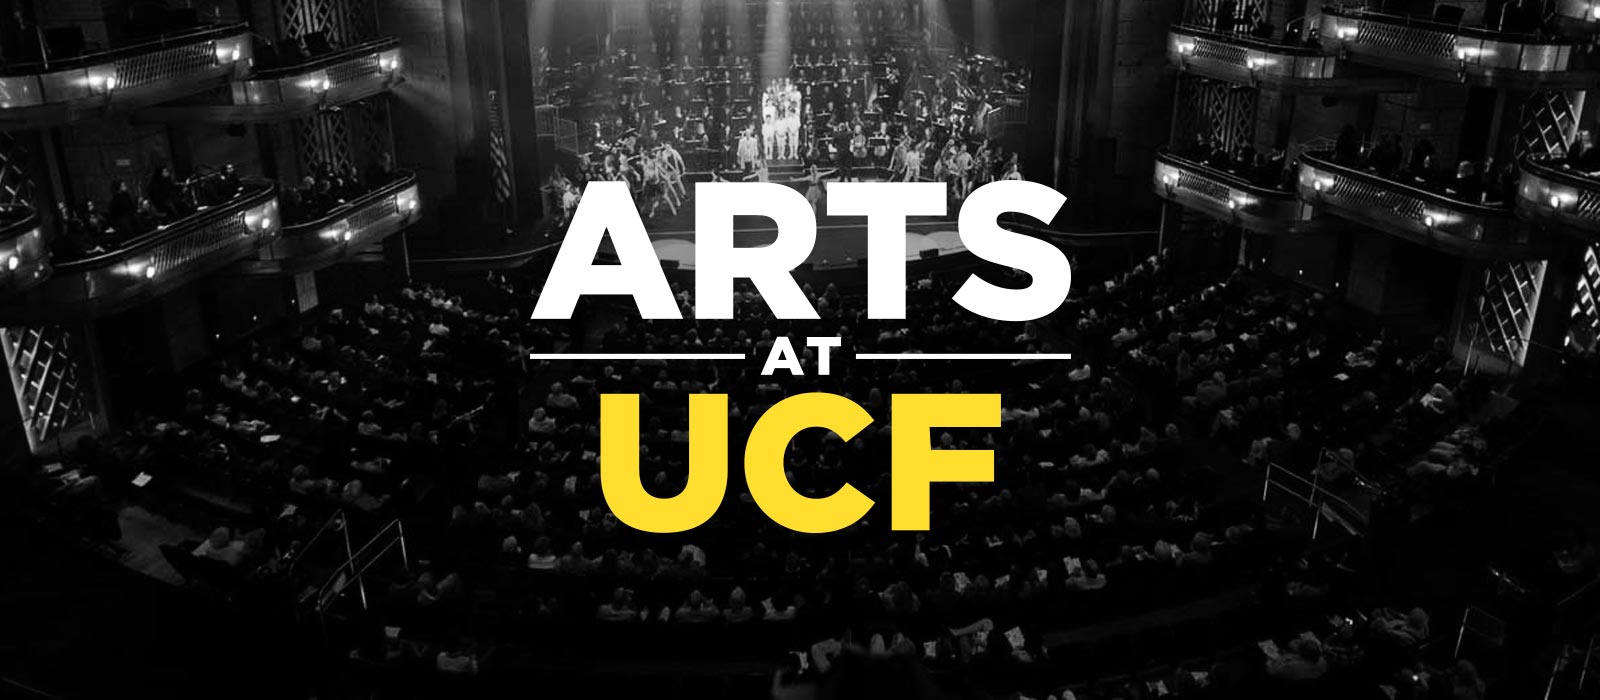 Text that says "ARTS AT UCF" with a music and theatre performance in the background.